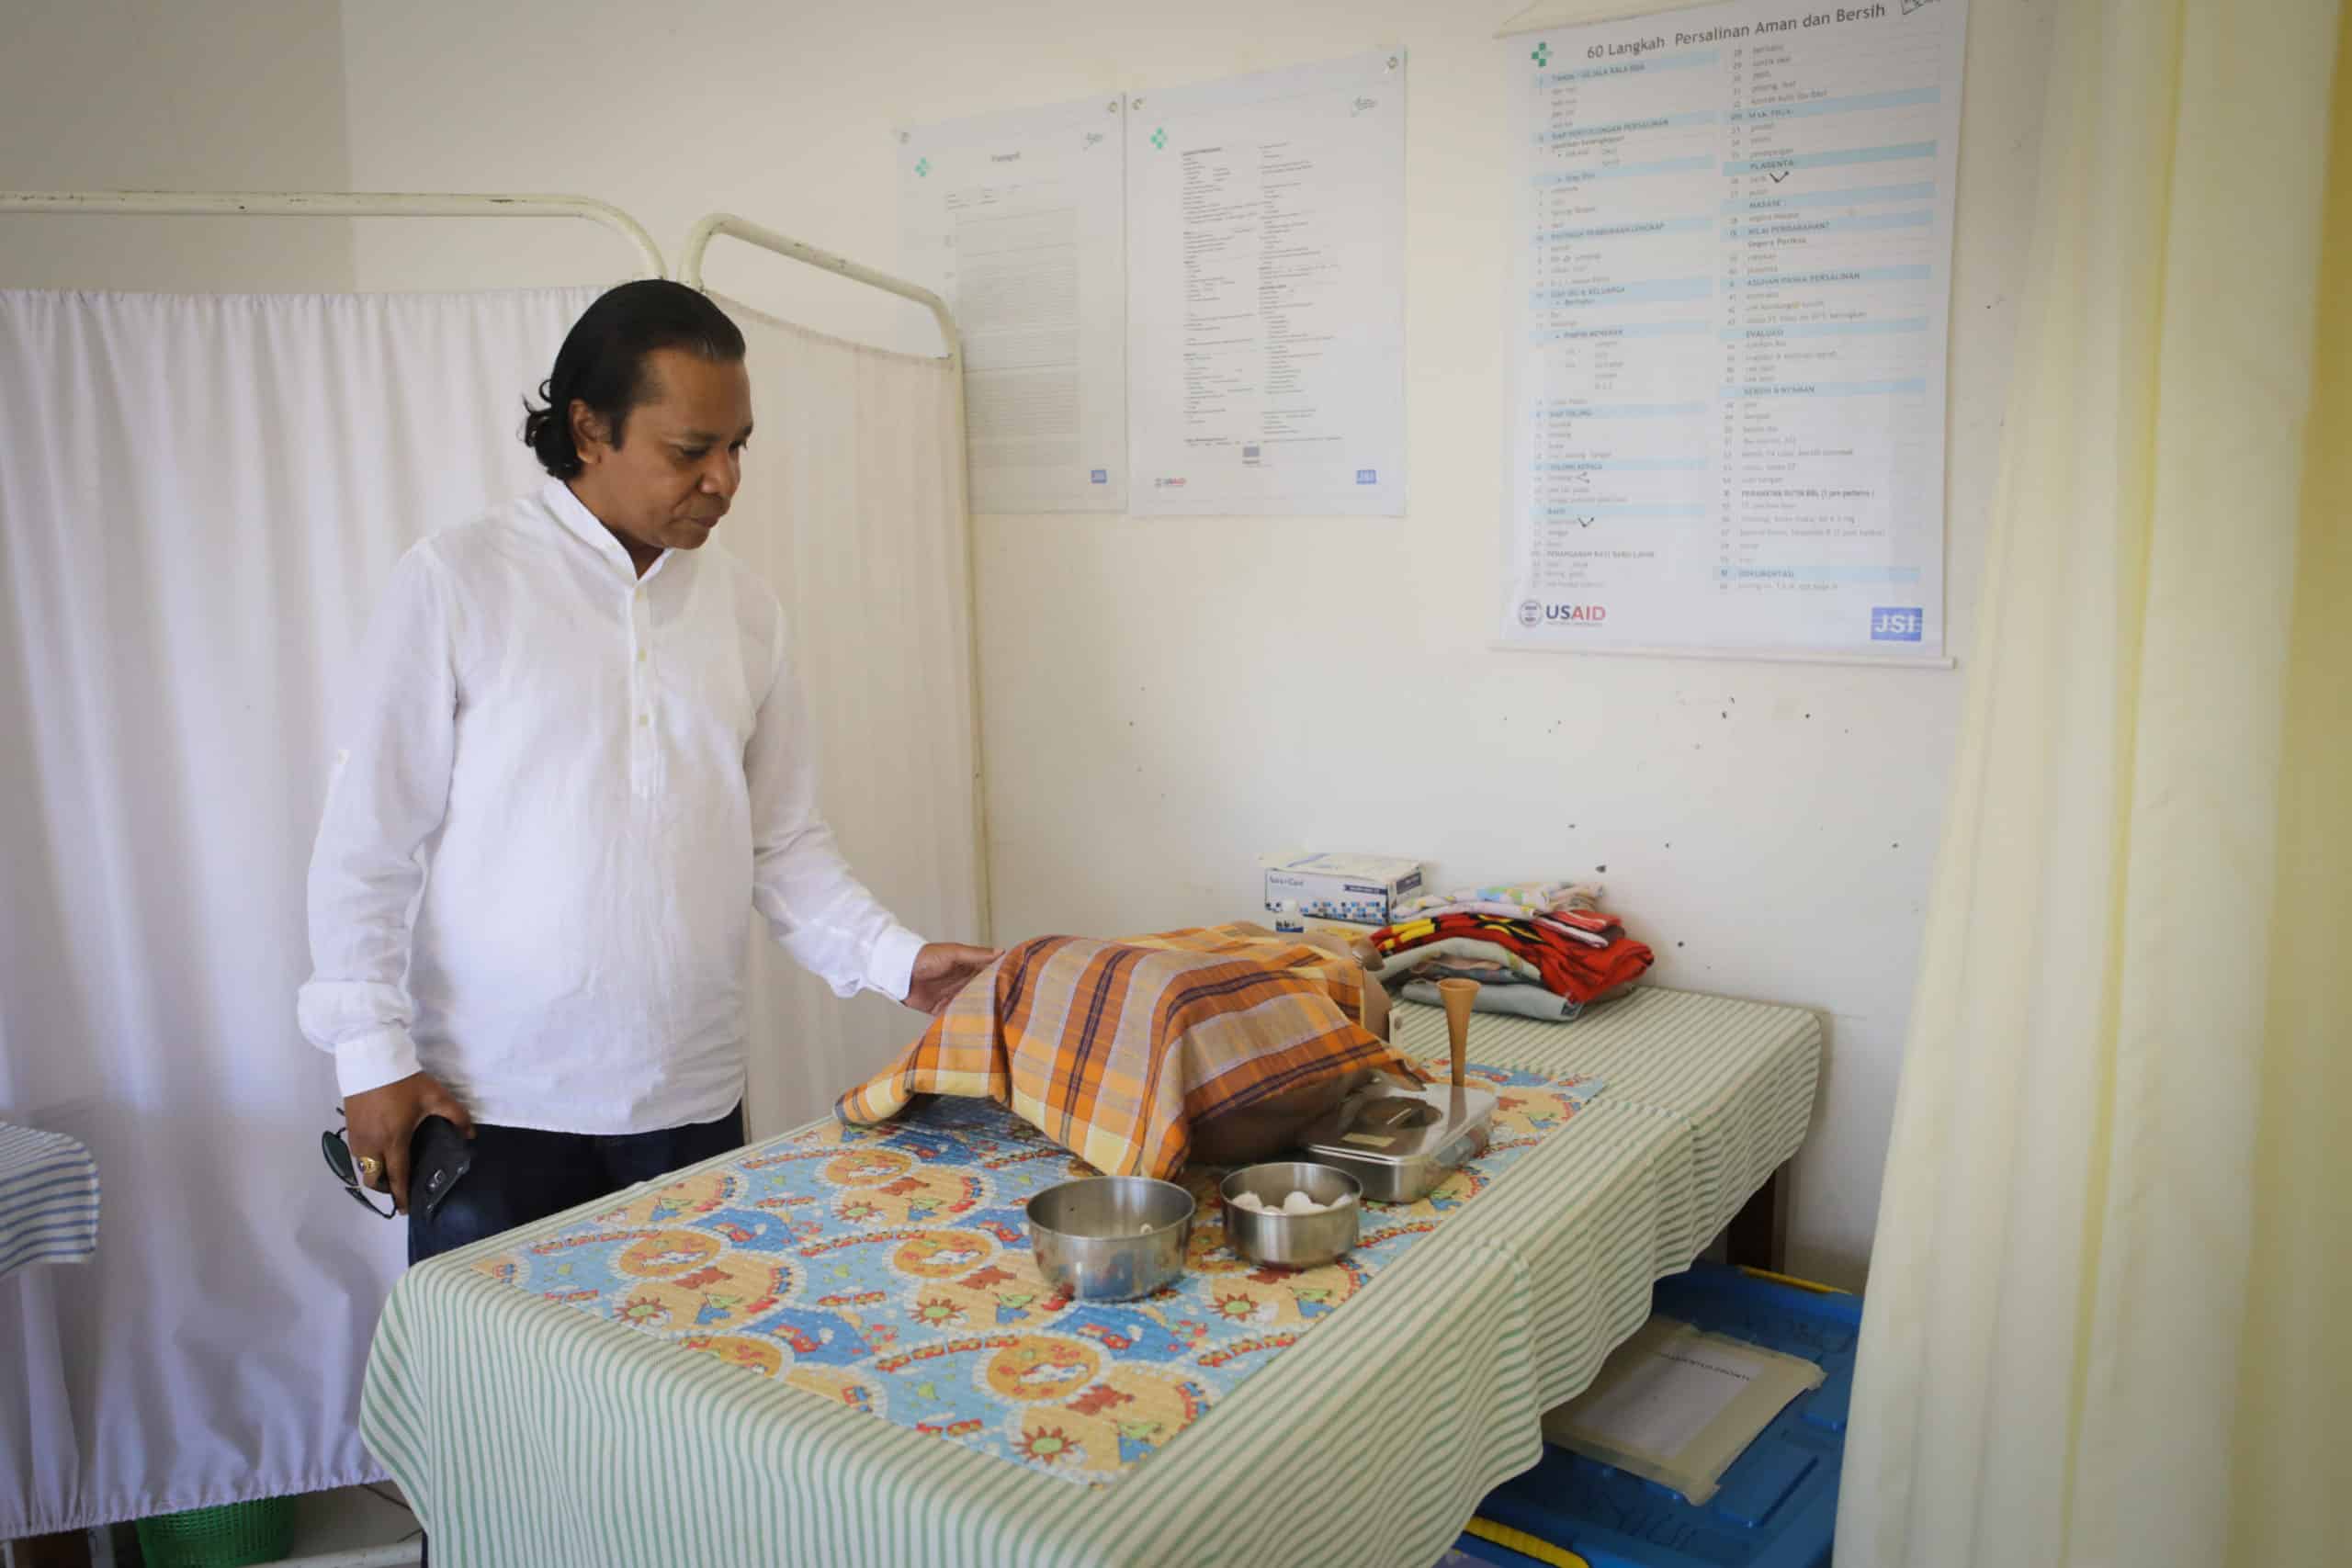 Dr. Nelson Martins in the newly equipped skills lab at Timor-Leste's health training institution, the National Institute of Health. JSI equipped the lab with funds from USAID through our Reinforce Basic Health Services Project.